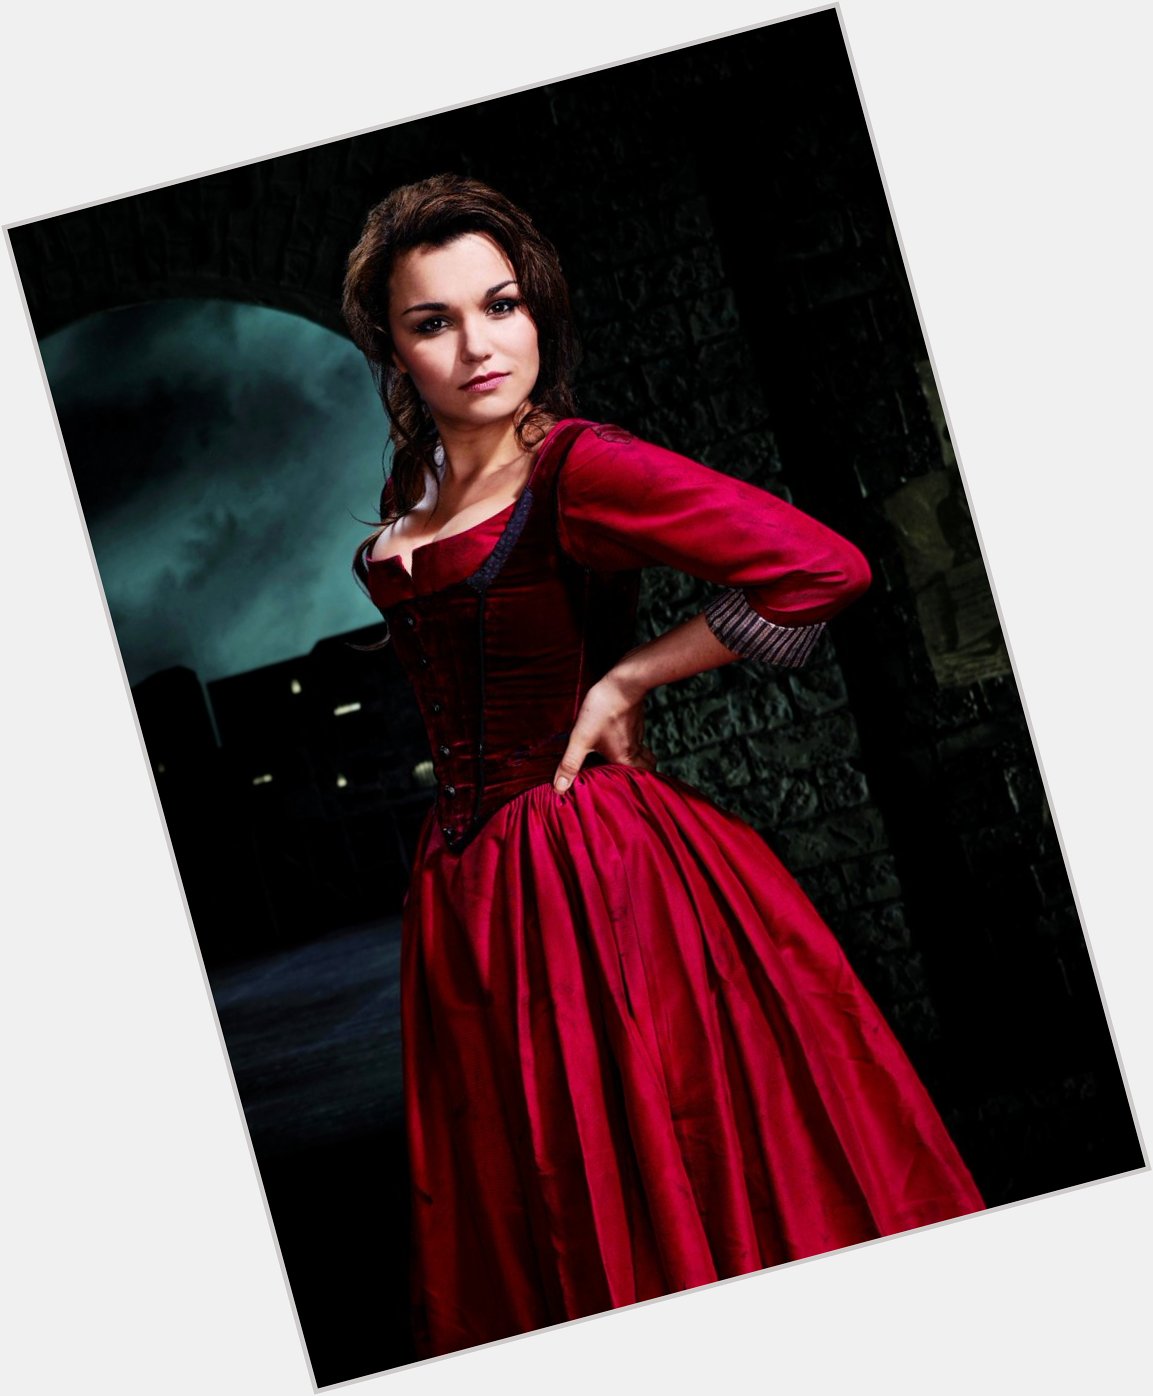 Oom Pah Pah, Oom Pah Pah! HAPPY BIRTHDAY to Samantha Barks who was last here as Nancy in Oliver! 27 today. 